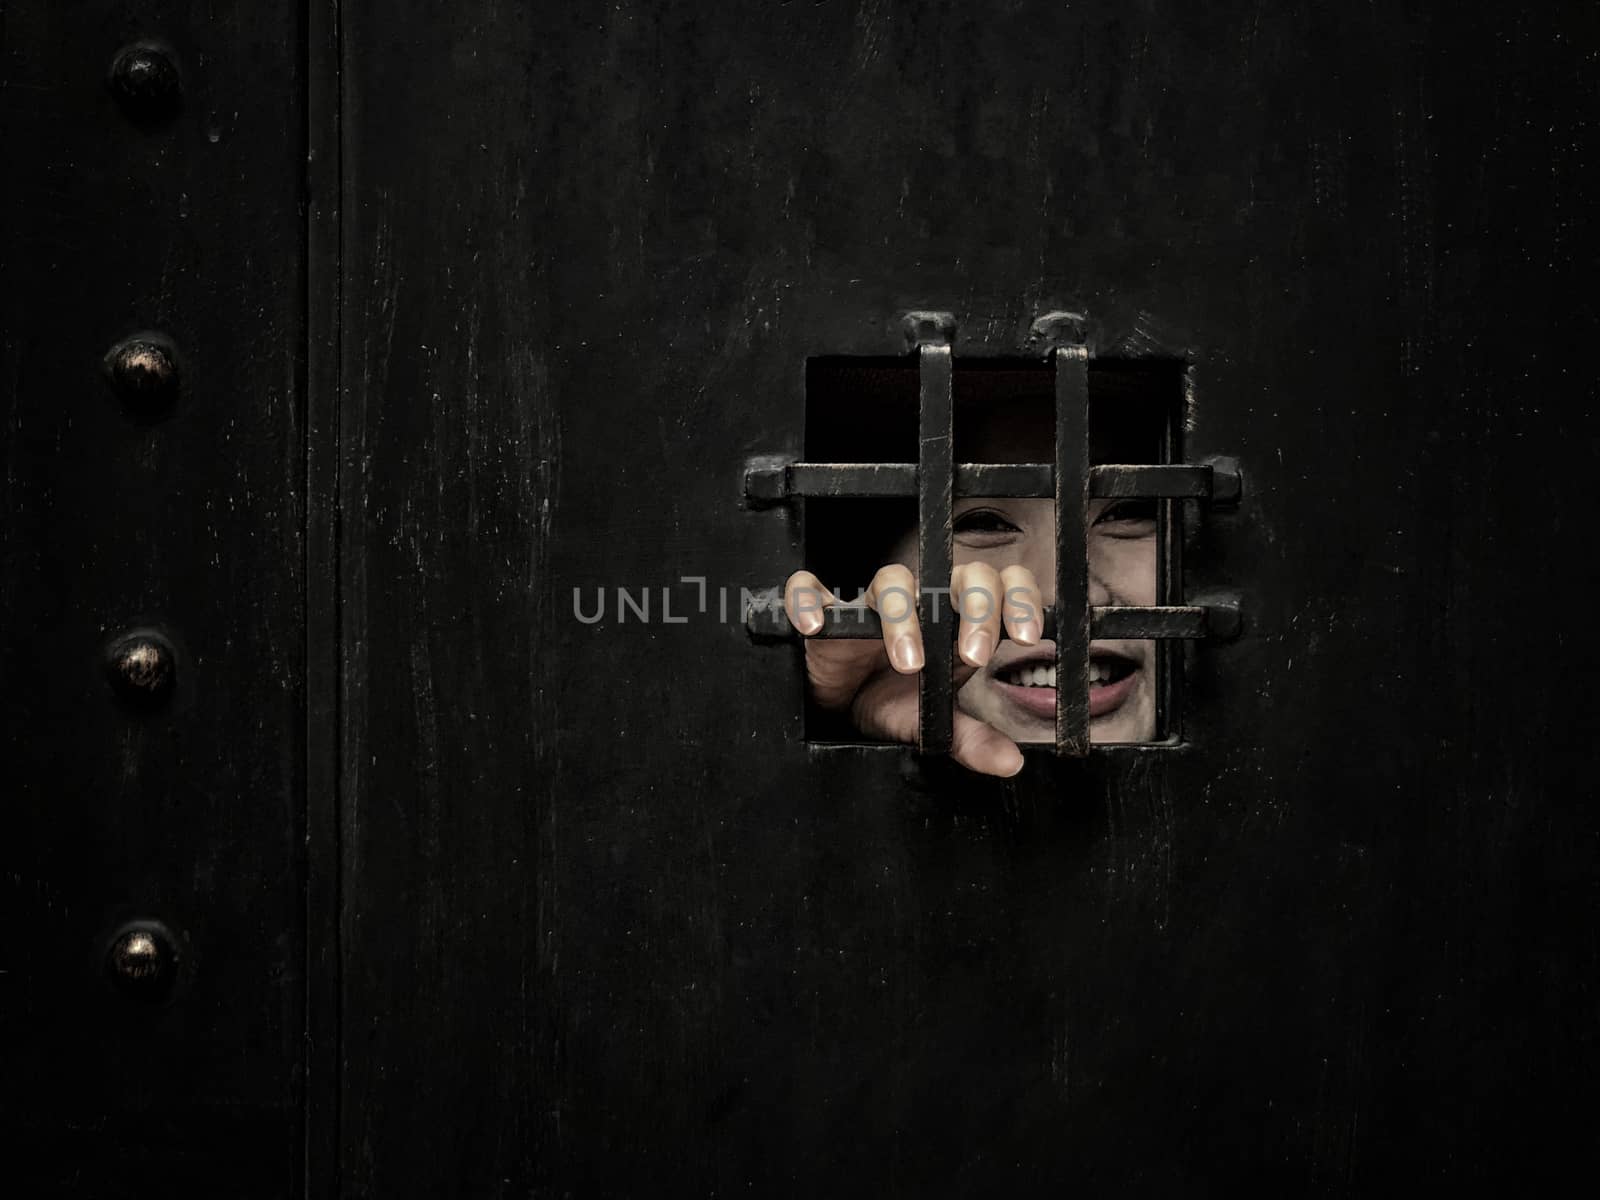 Horror woman locked in dark cage hand holding cage scary scene halloween concept